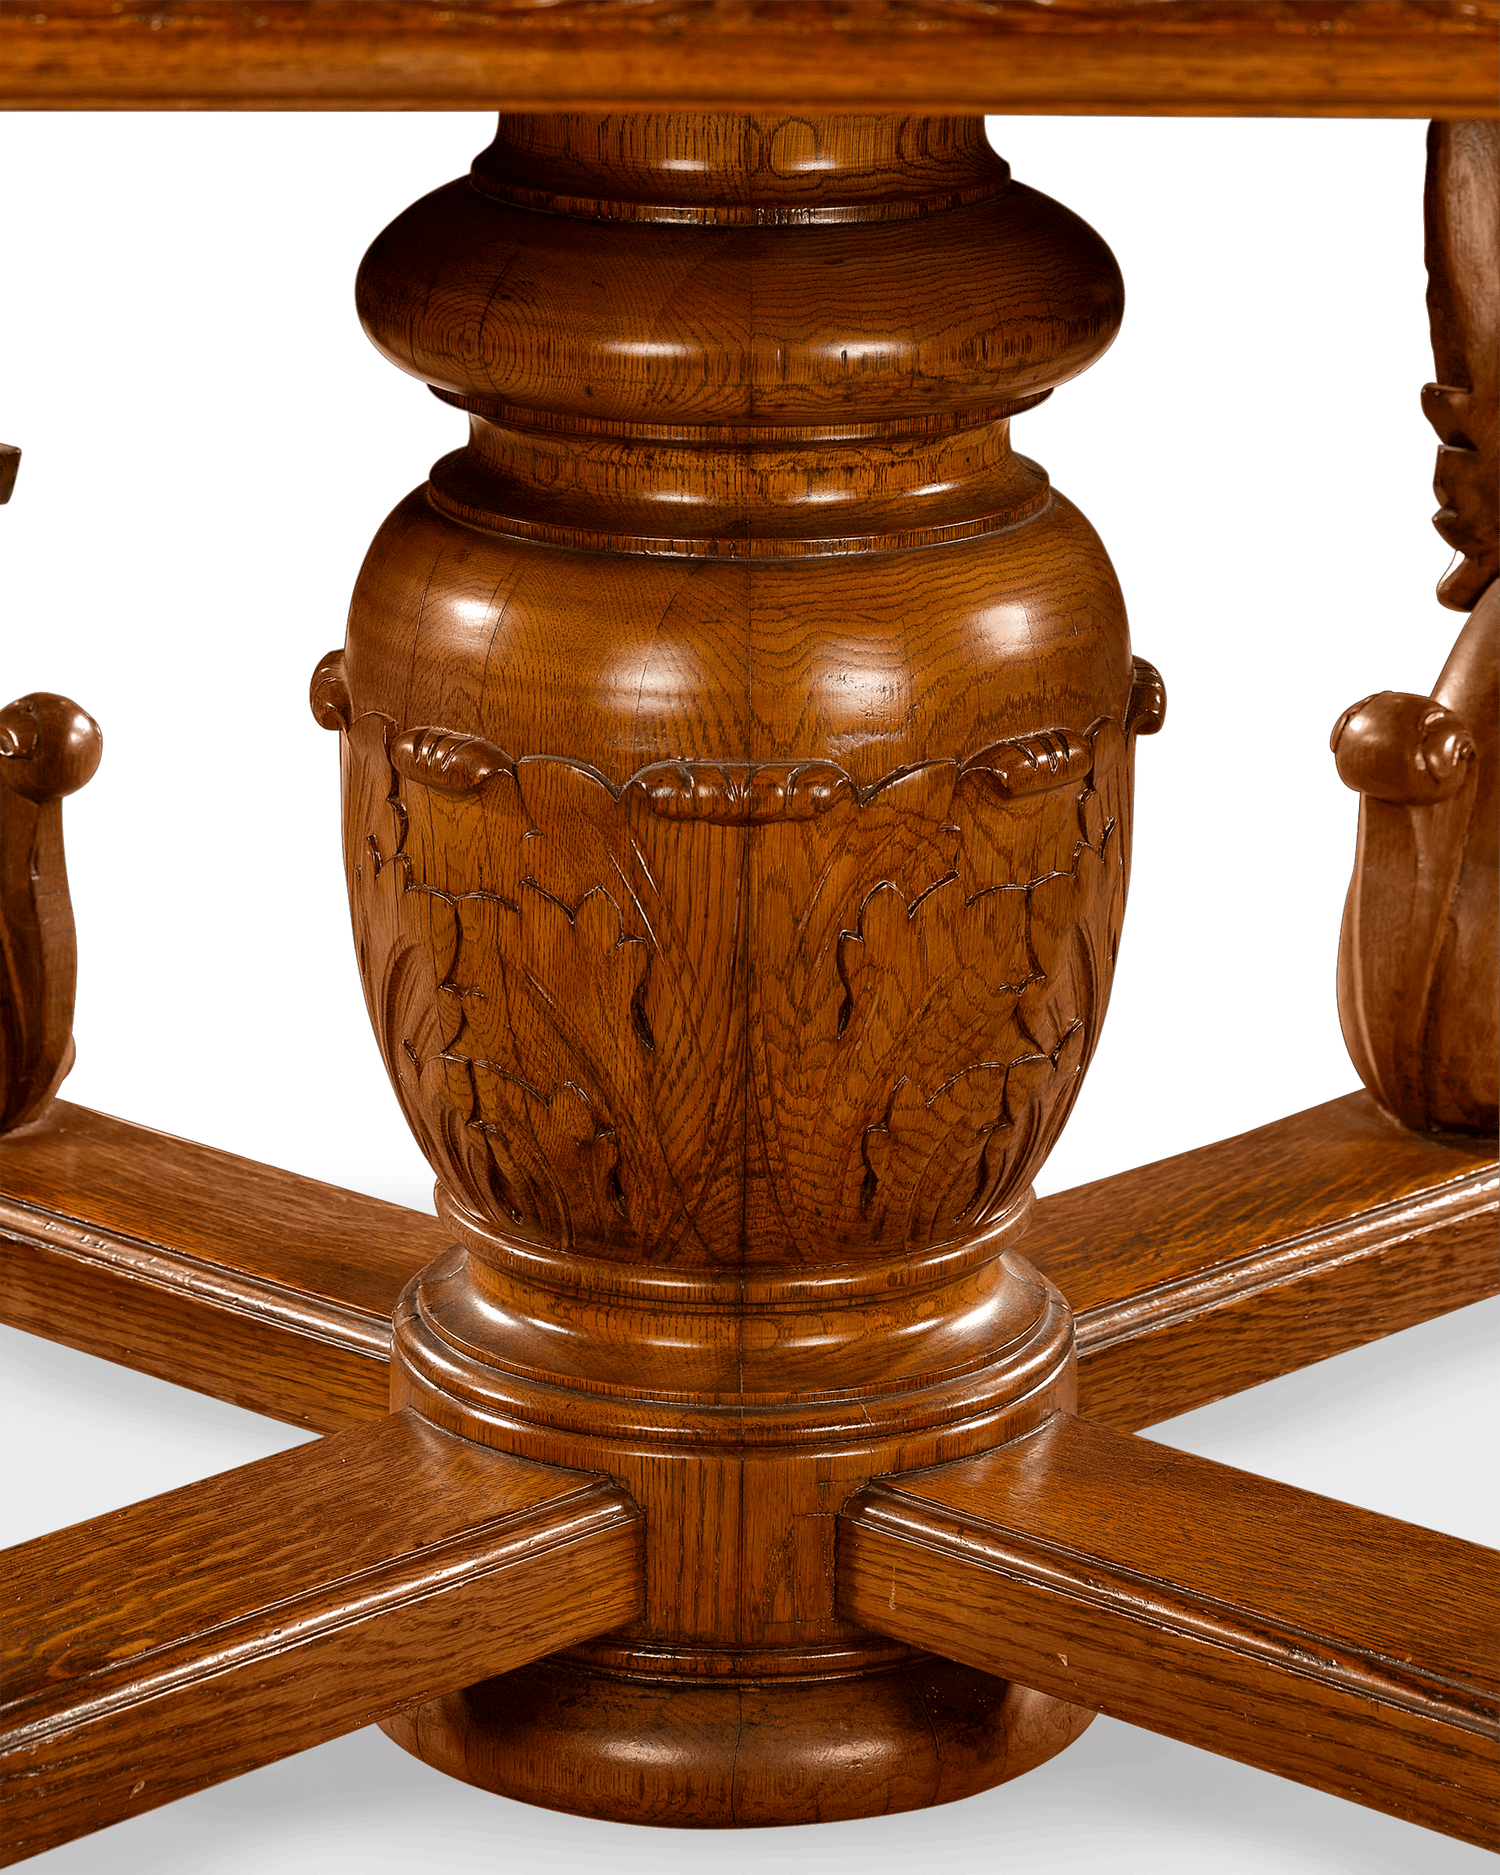 Even the central table support is finely carved